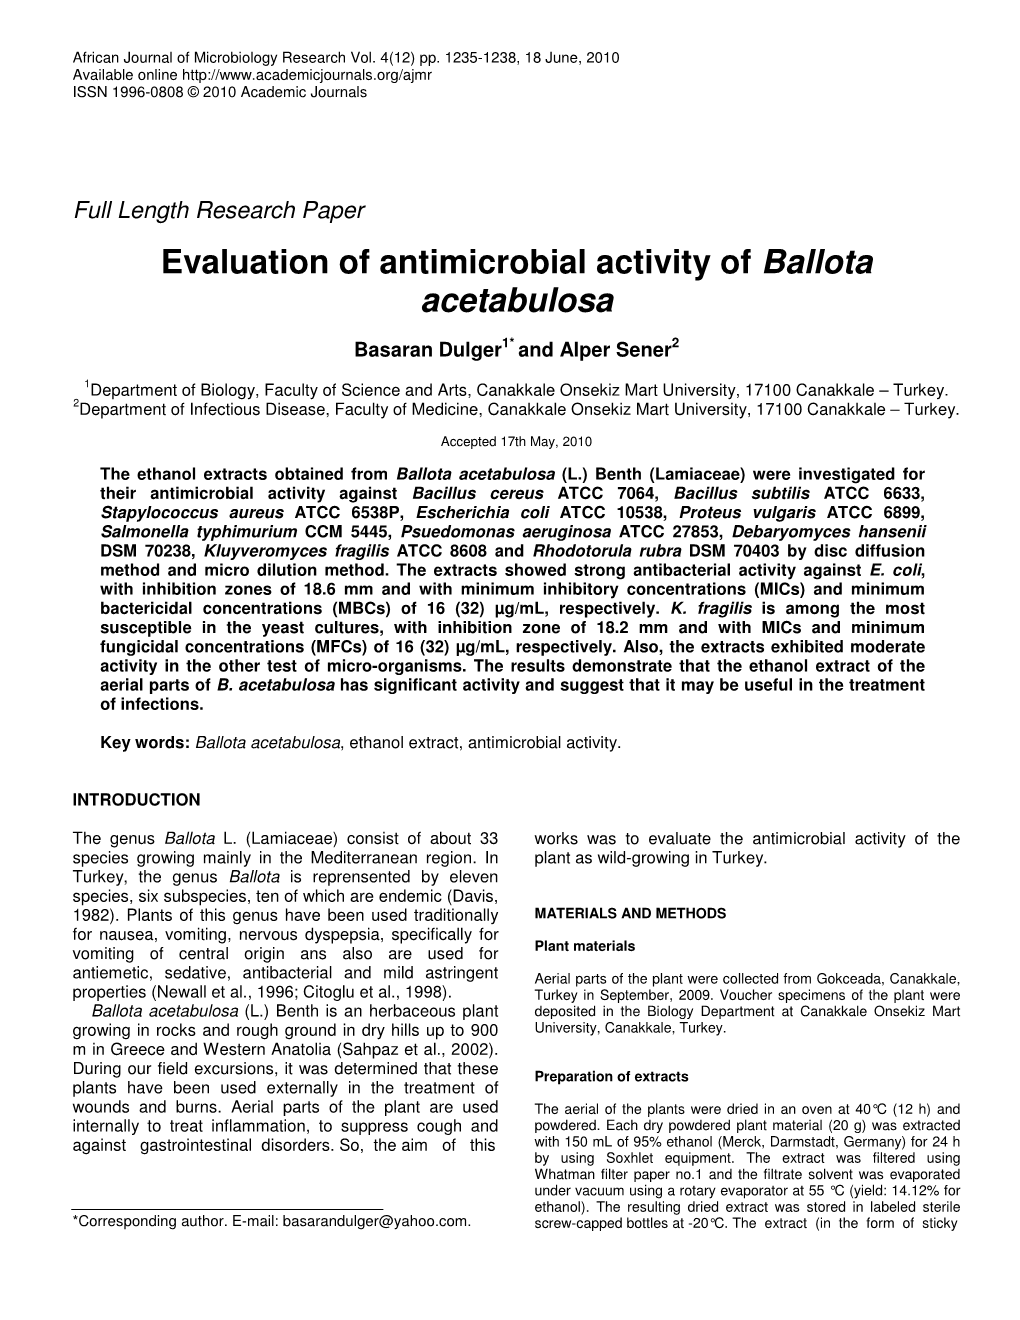 Evaluation of Antimicrobial Activity of Ballota Acetabulosa